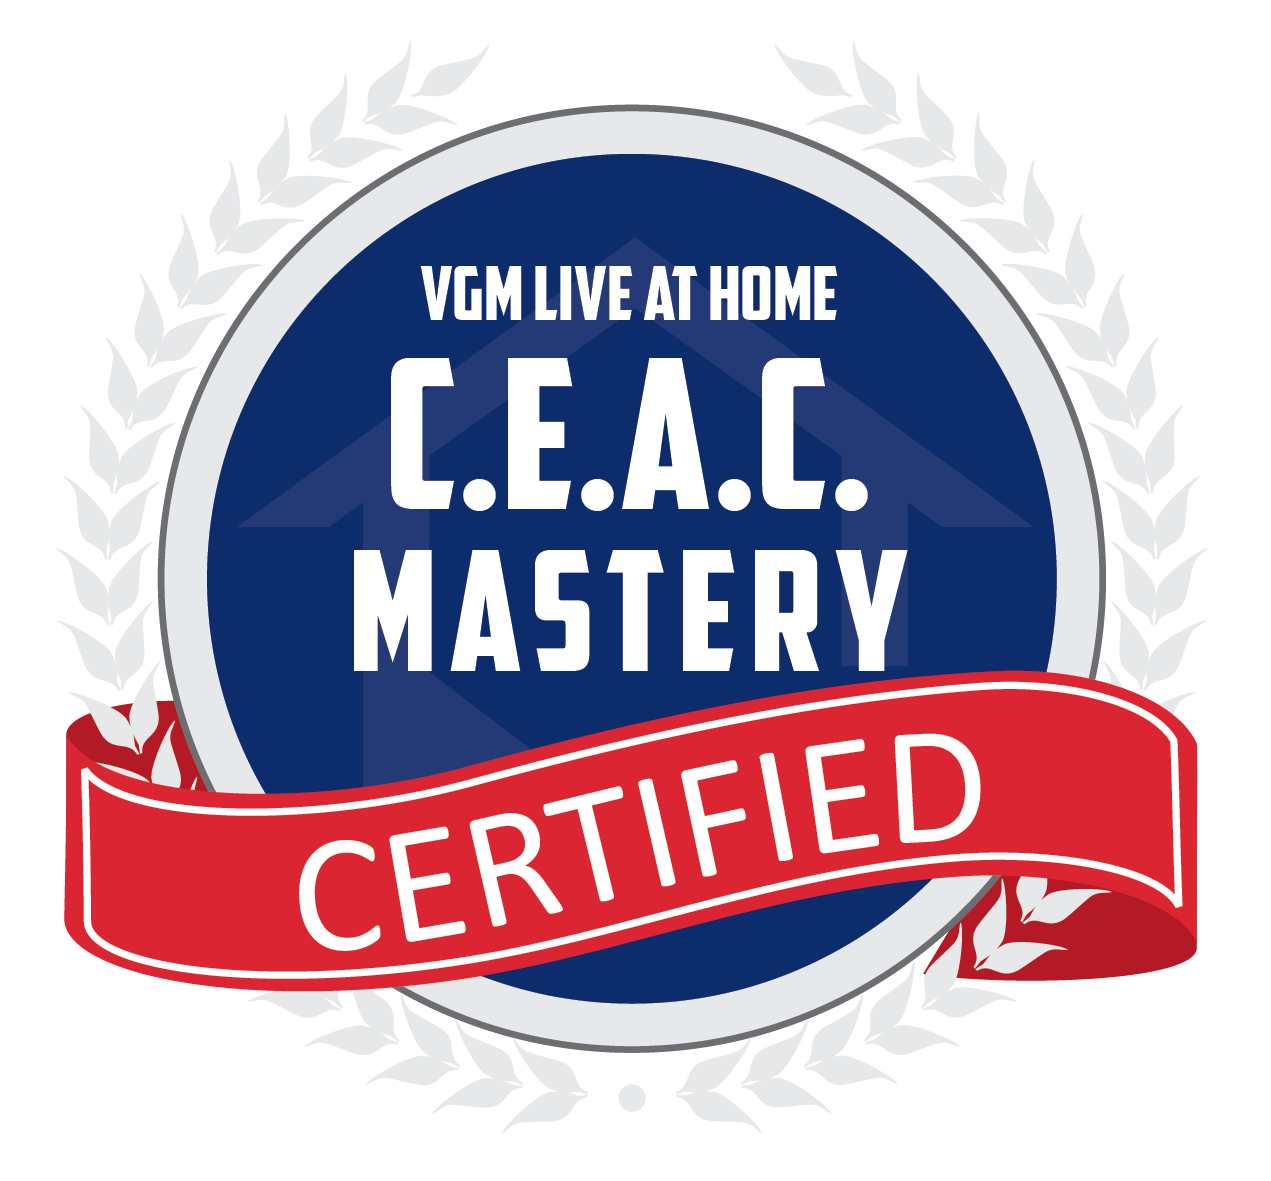 CEAC MASTERY Certified Mark 2